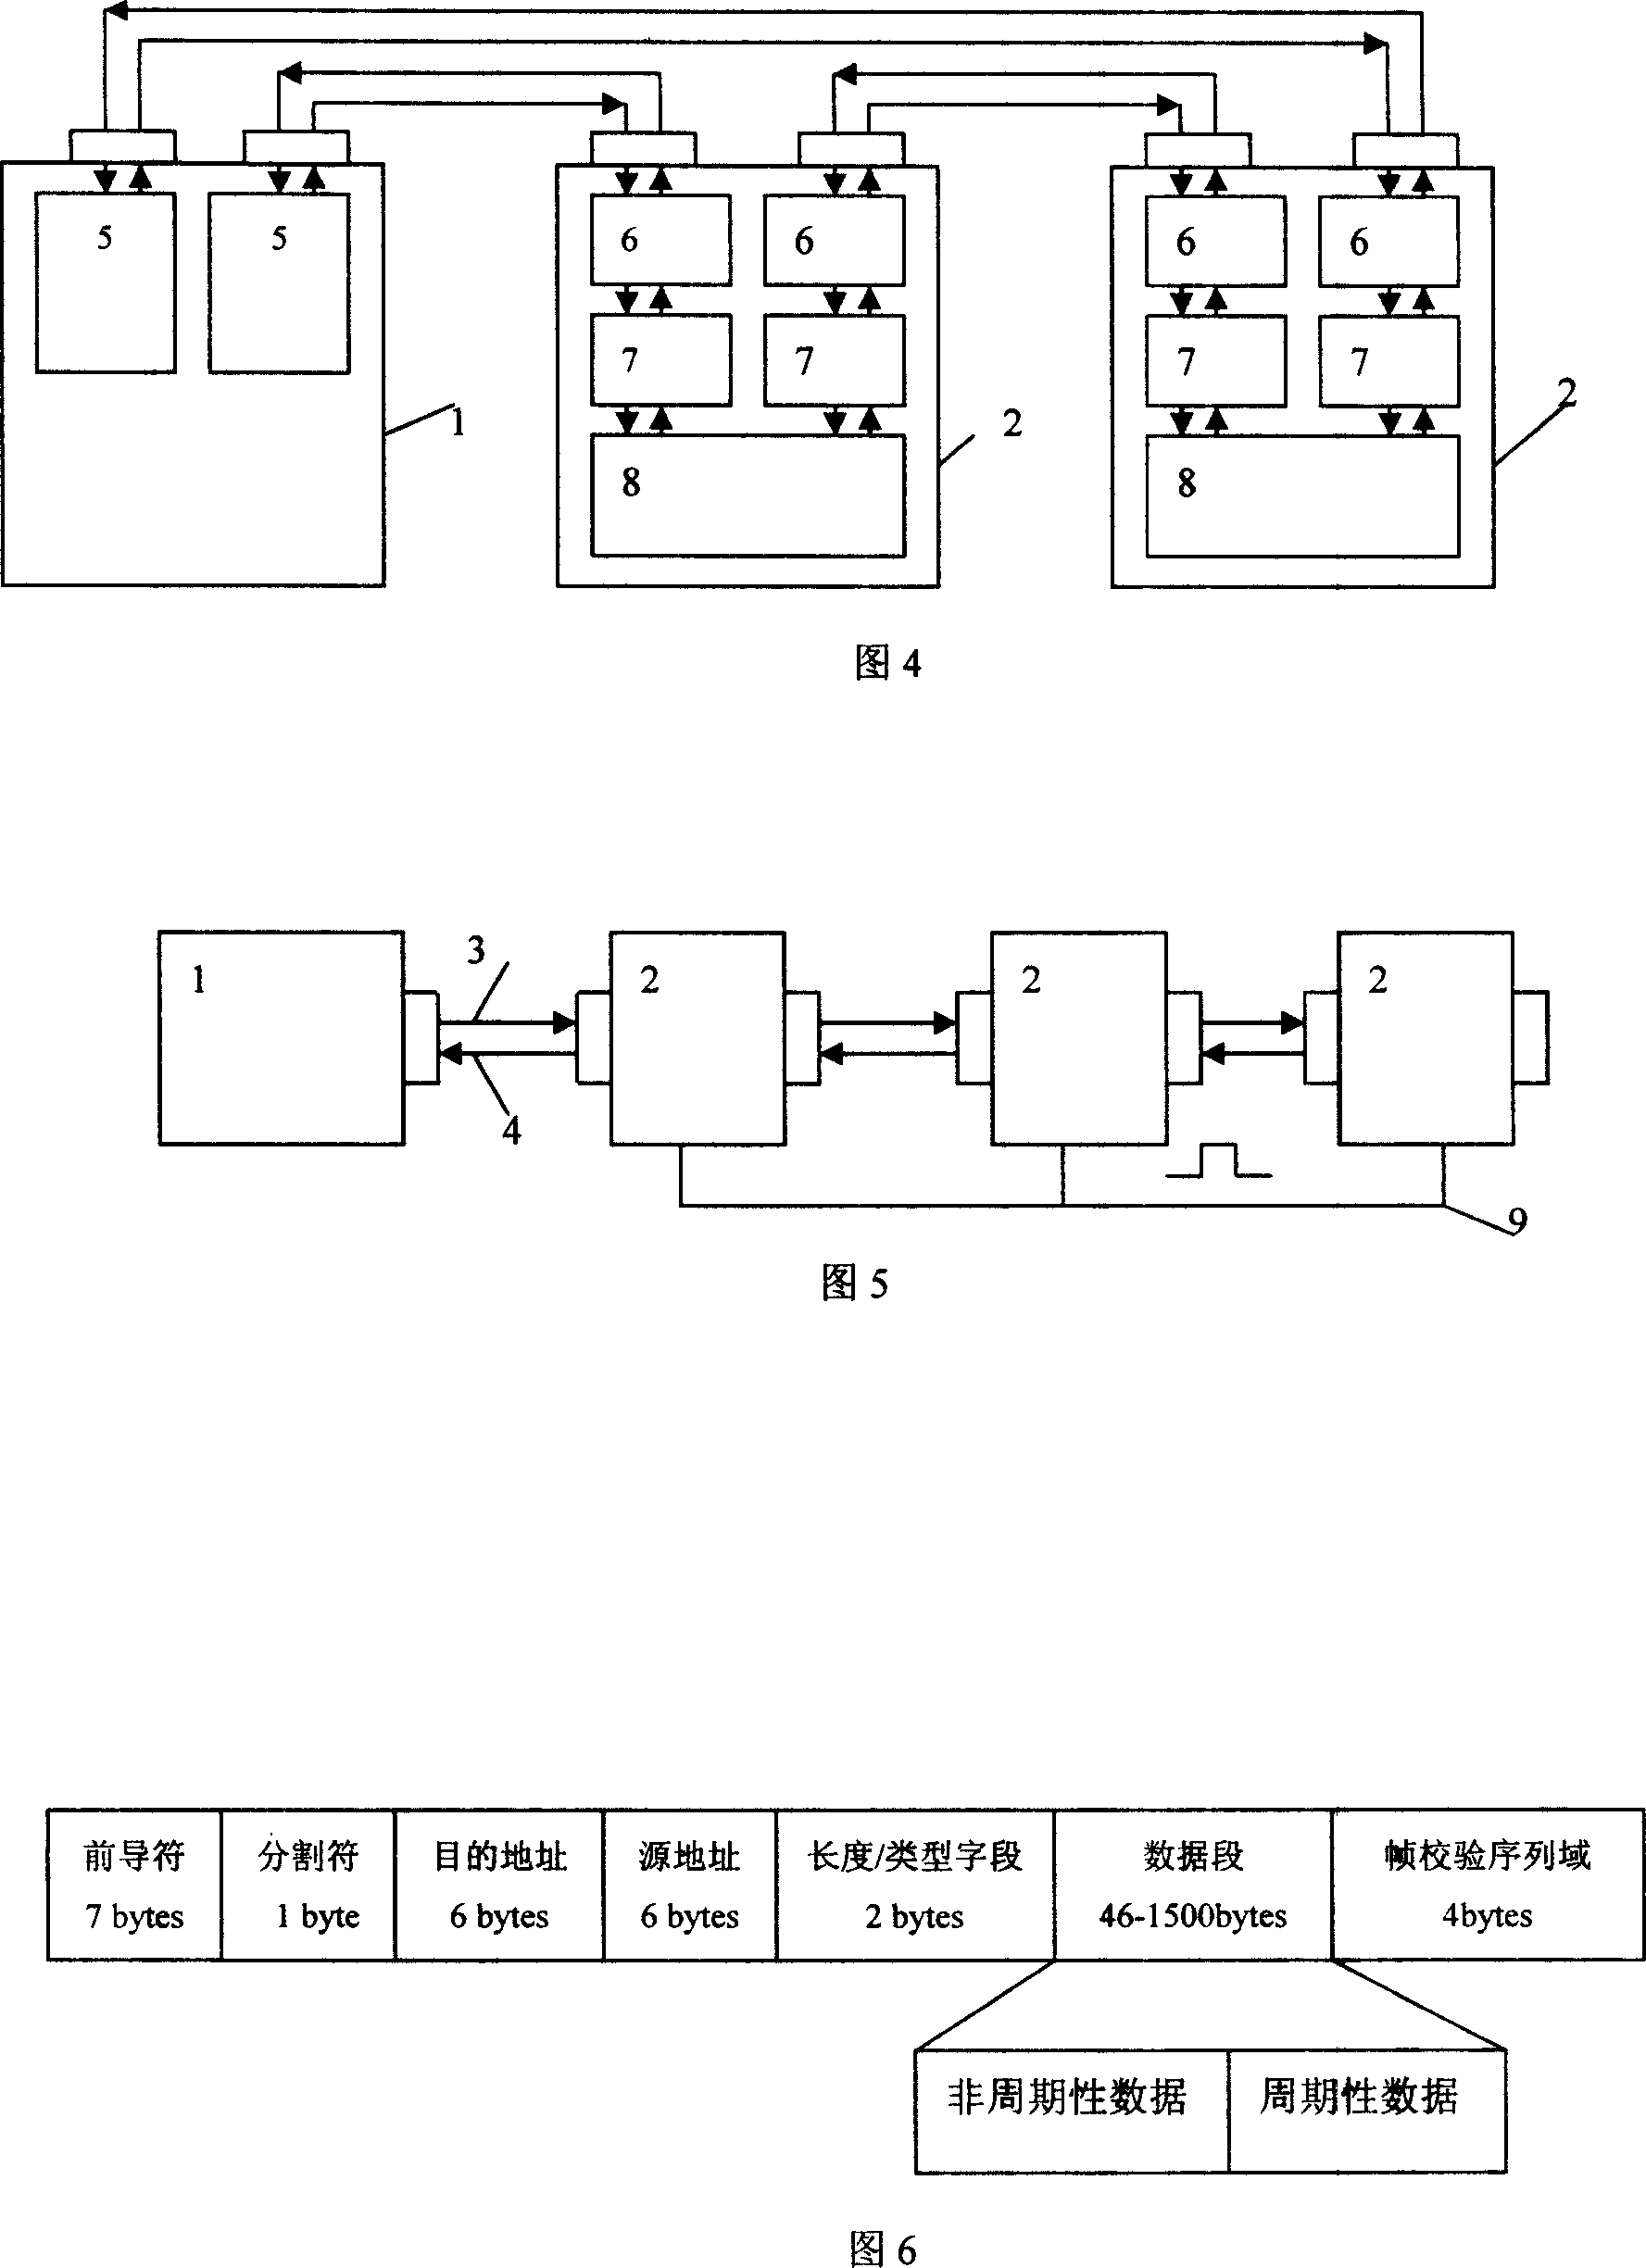 Real time synchronization network based on the standard Ethernet and its operating method